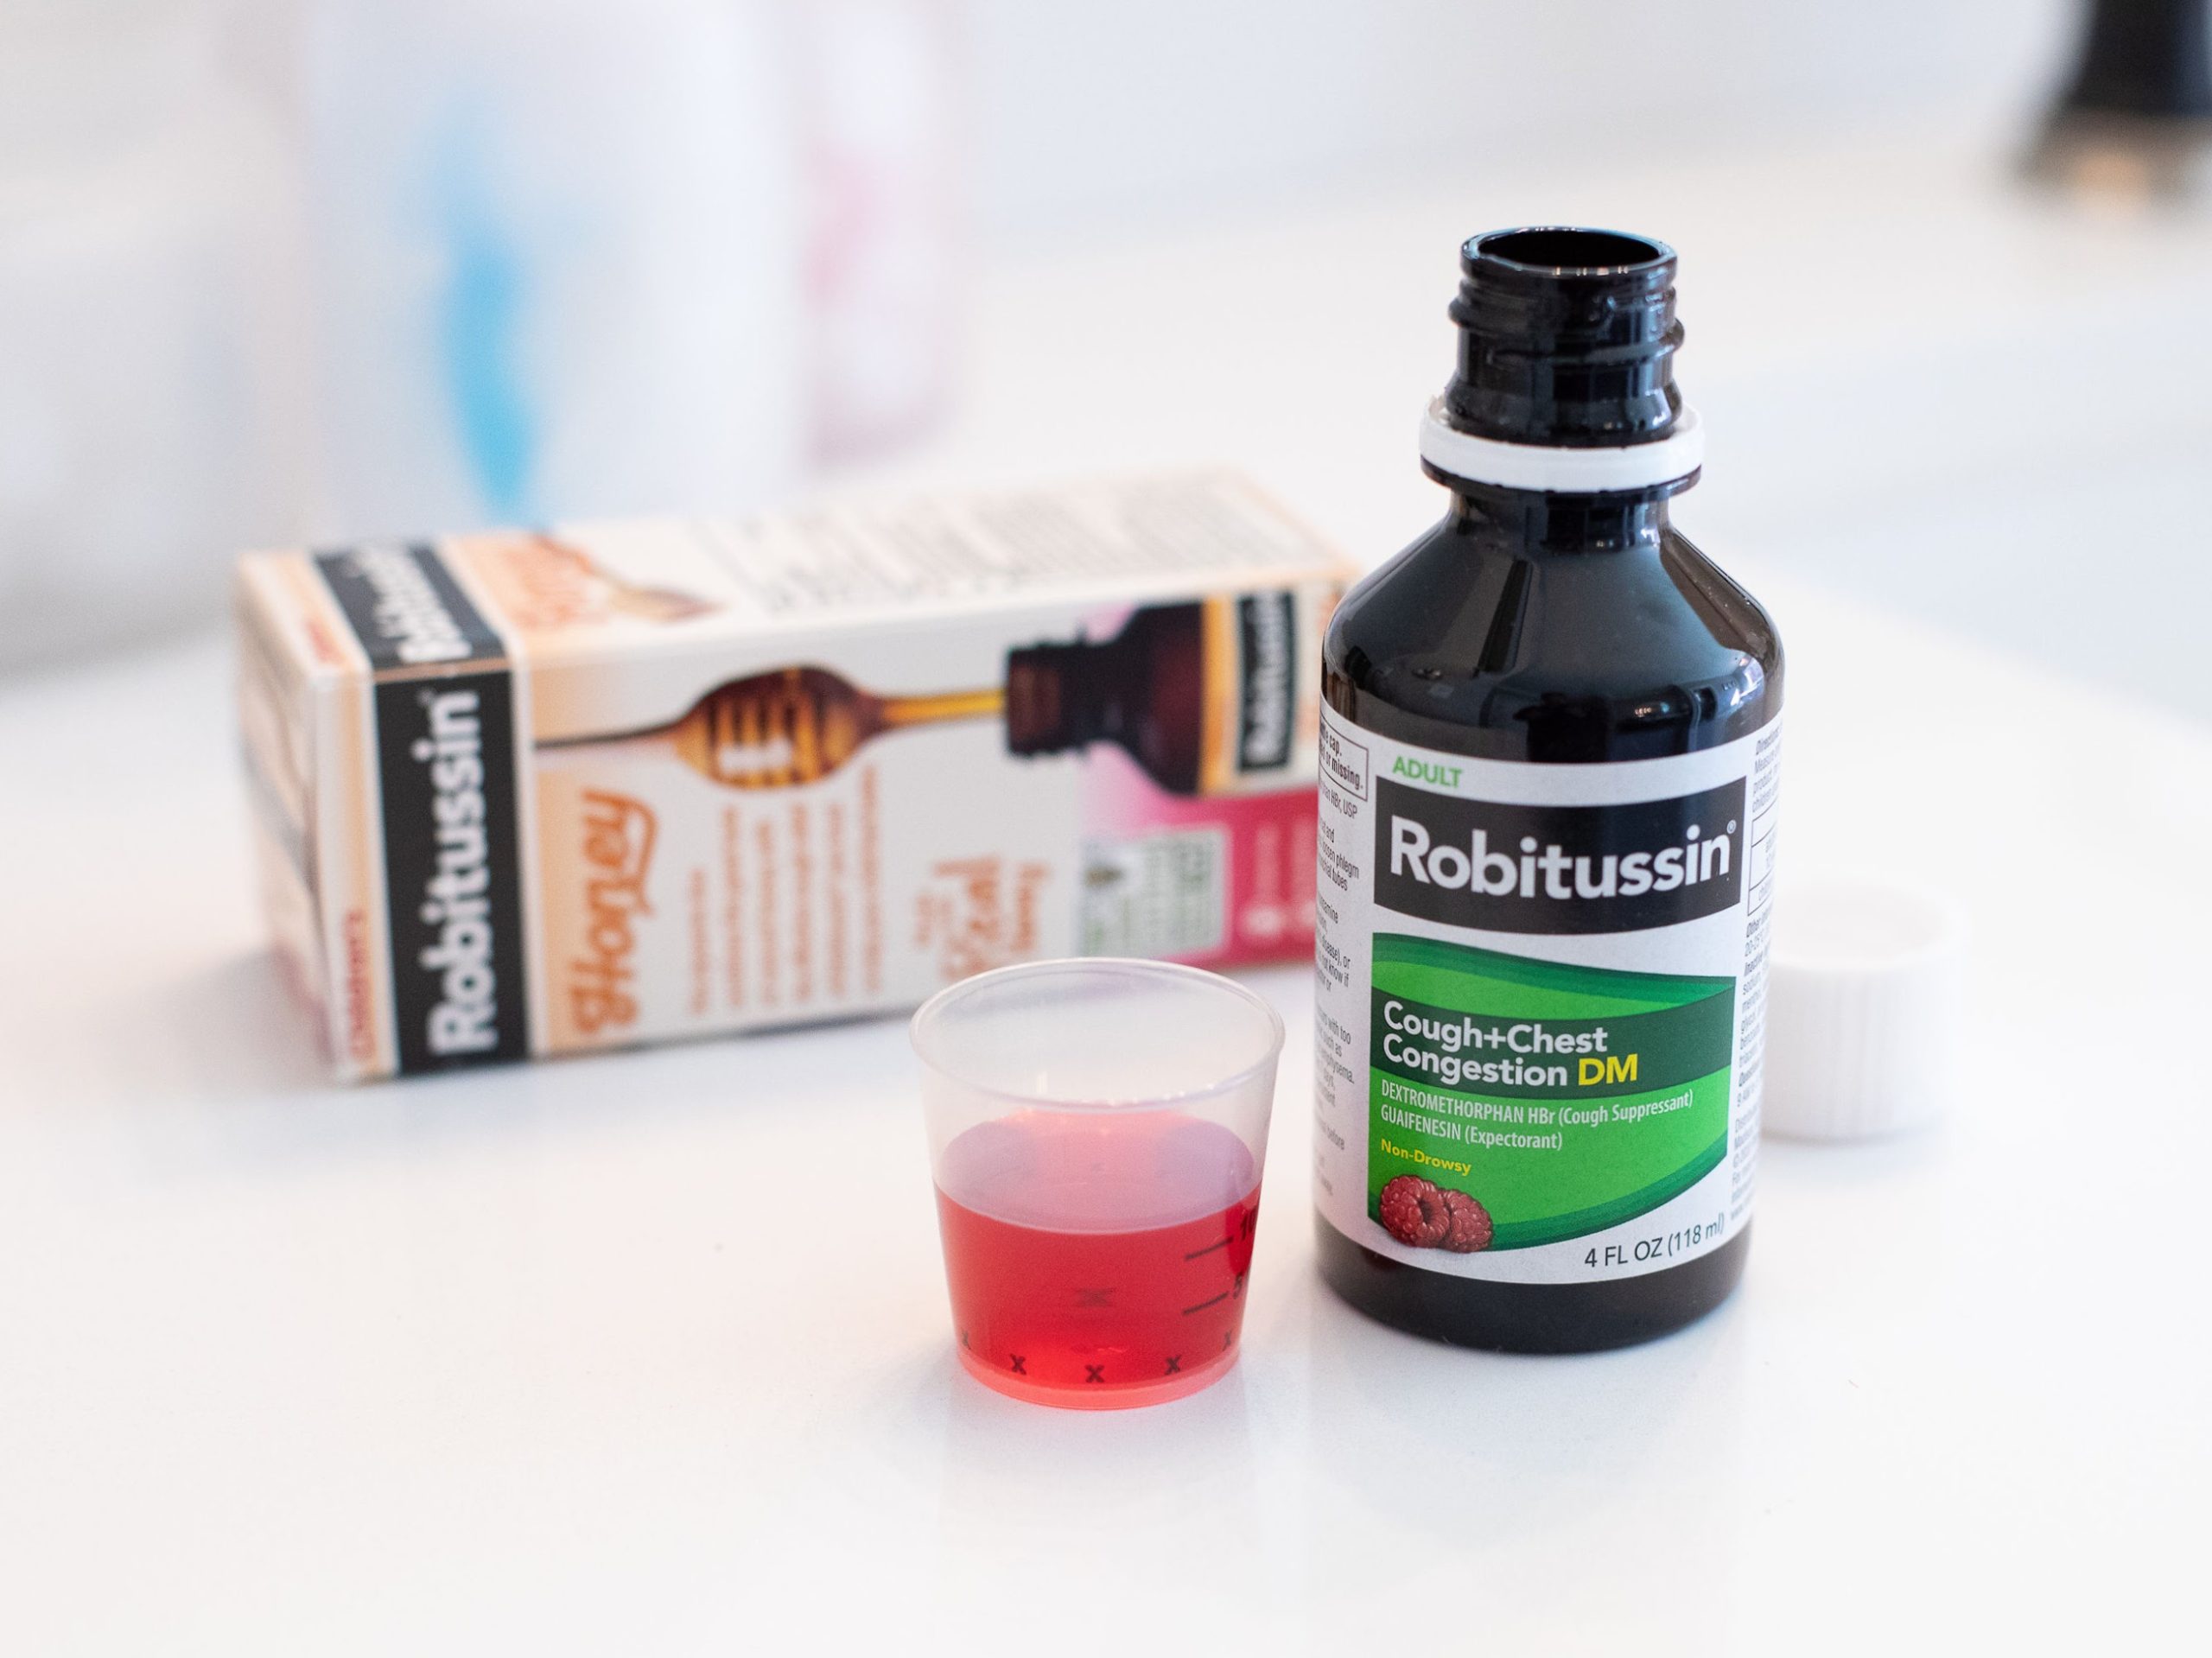 Robitussin As Low As $2.99 At Publix (Regular Price $6.99)